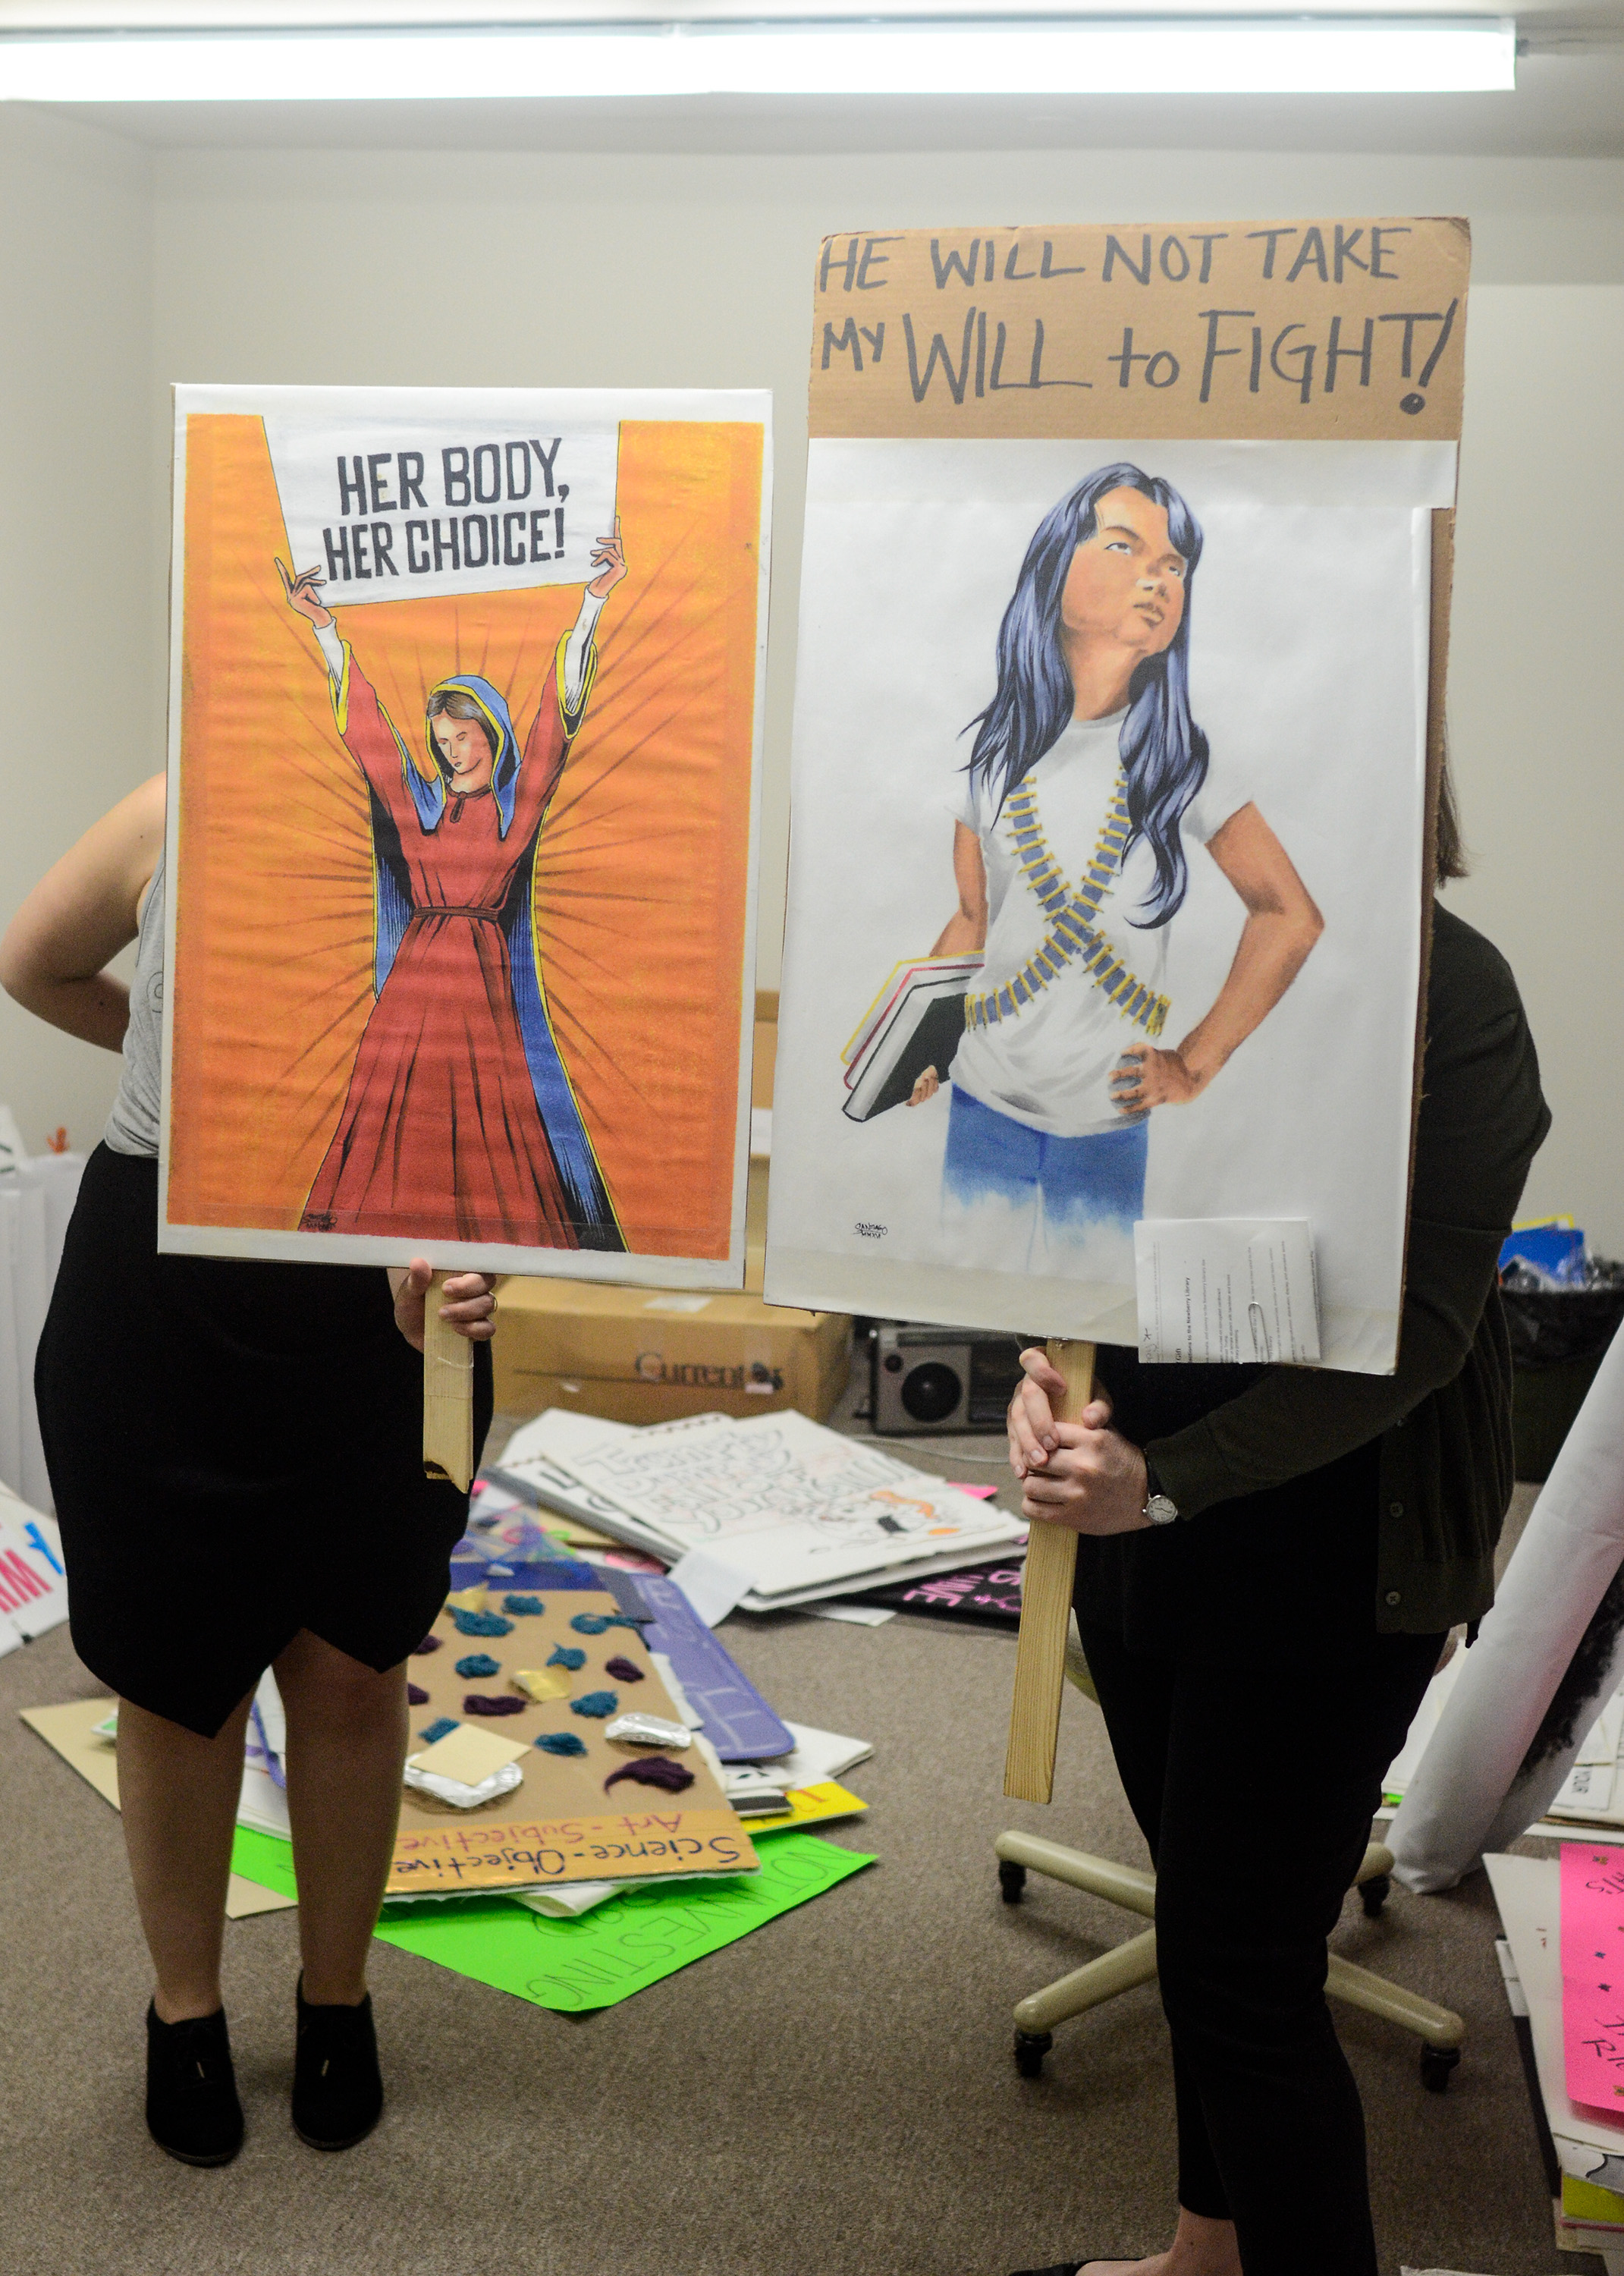 Image: Catherine Grandgeorge and Jennifer Patiño Cervantes hold up signs in front of them. The two signs are of images made by and donated by artists Adrian Santiago-Alvarez. One shows a Virgin Mary like figure holding a sign that says "Her Body Her Choice." The other shows a defiant young woman holding books and wearing bandoliers under a sign that says "He Will Not Take My Will to Fight!" Image by William Camargo. 